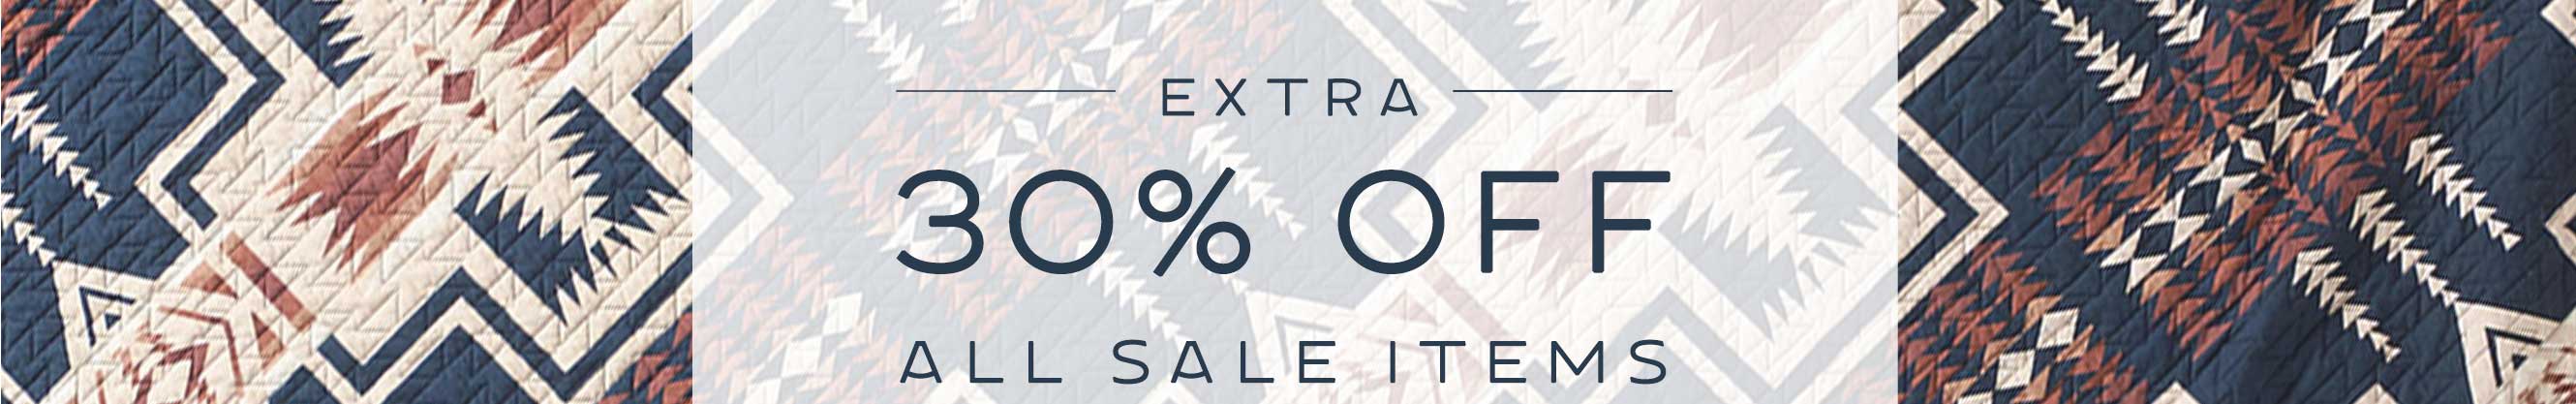 Extra 30% off All Sale Items